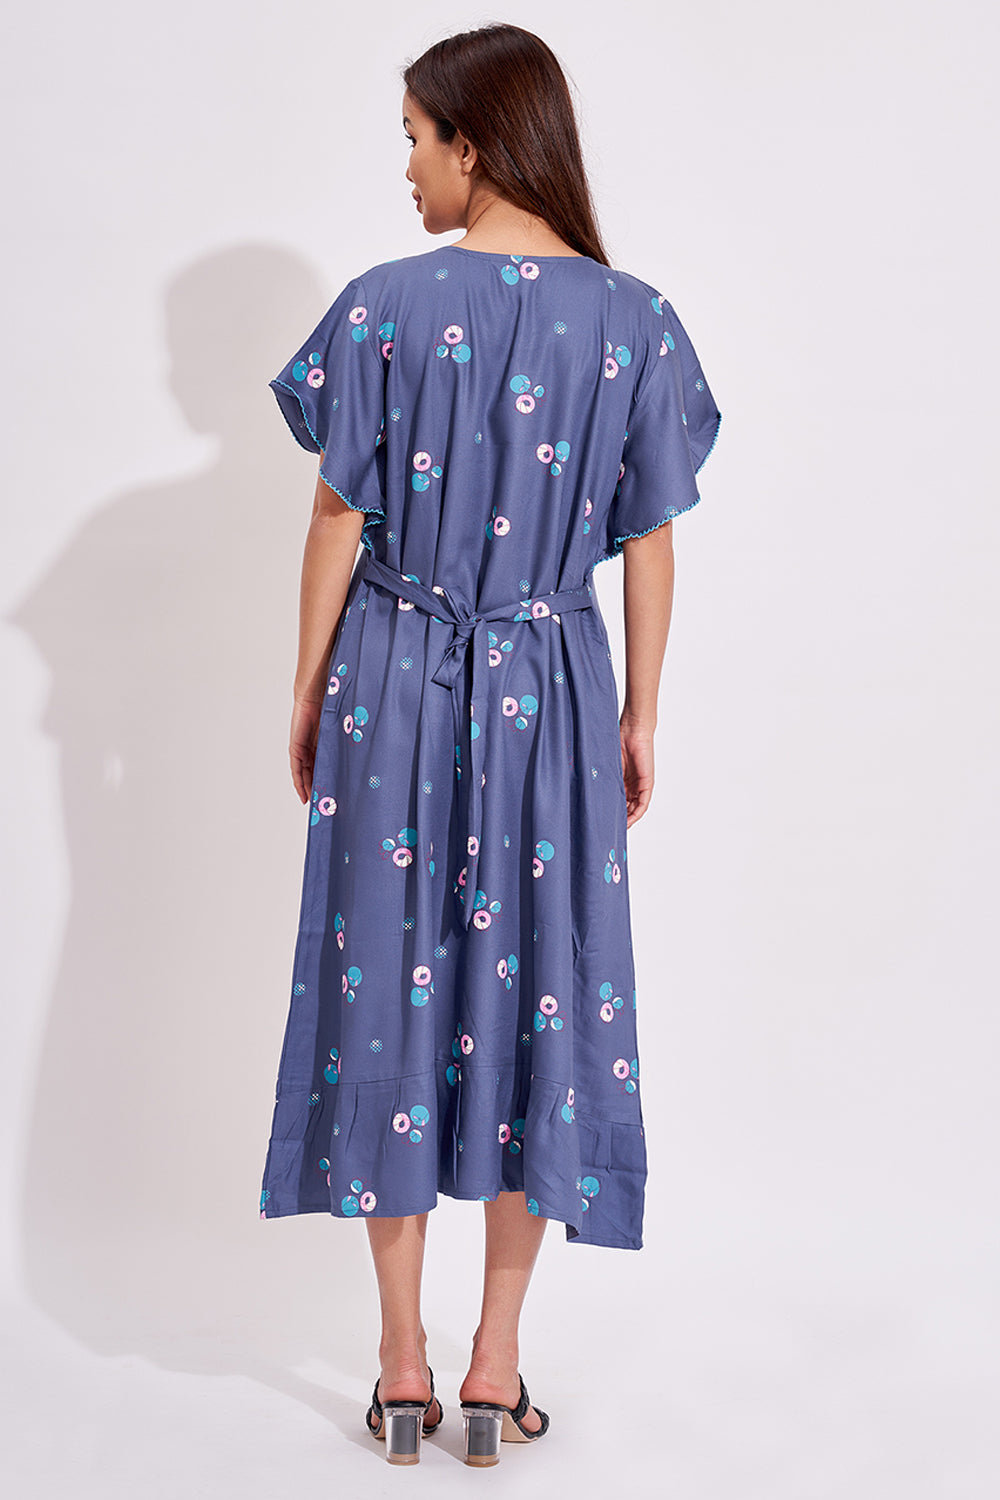 Skkinvalue's Special Free style rayon printed nighty nightgowns for wo –  skkinvalue